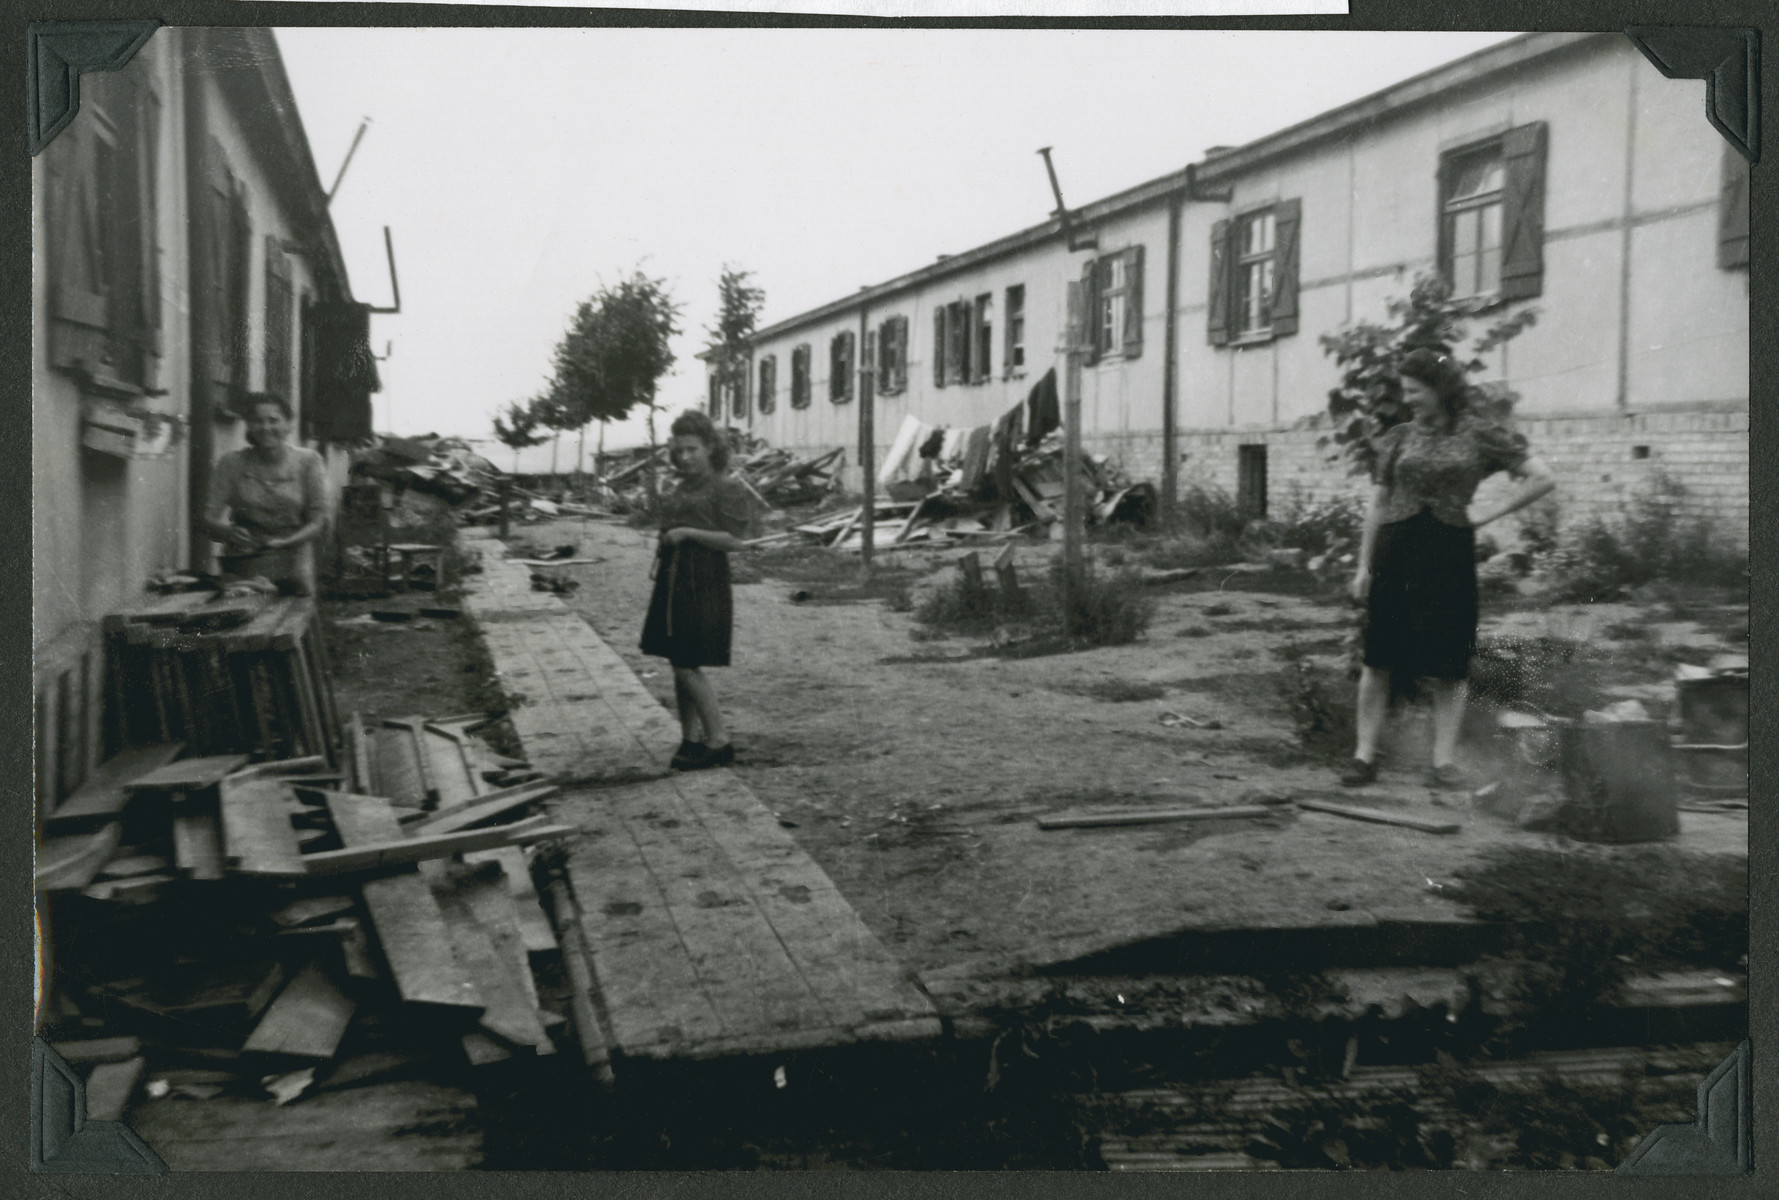 Women walk past debris strewn on a street in the Ziegenhain displaced persons camp.

The original caption reads: "Ziegenhain: Reconstruction.  The women wash their laundry amid the piles of debris the men were cleaning out."